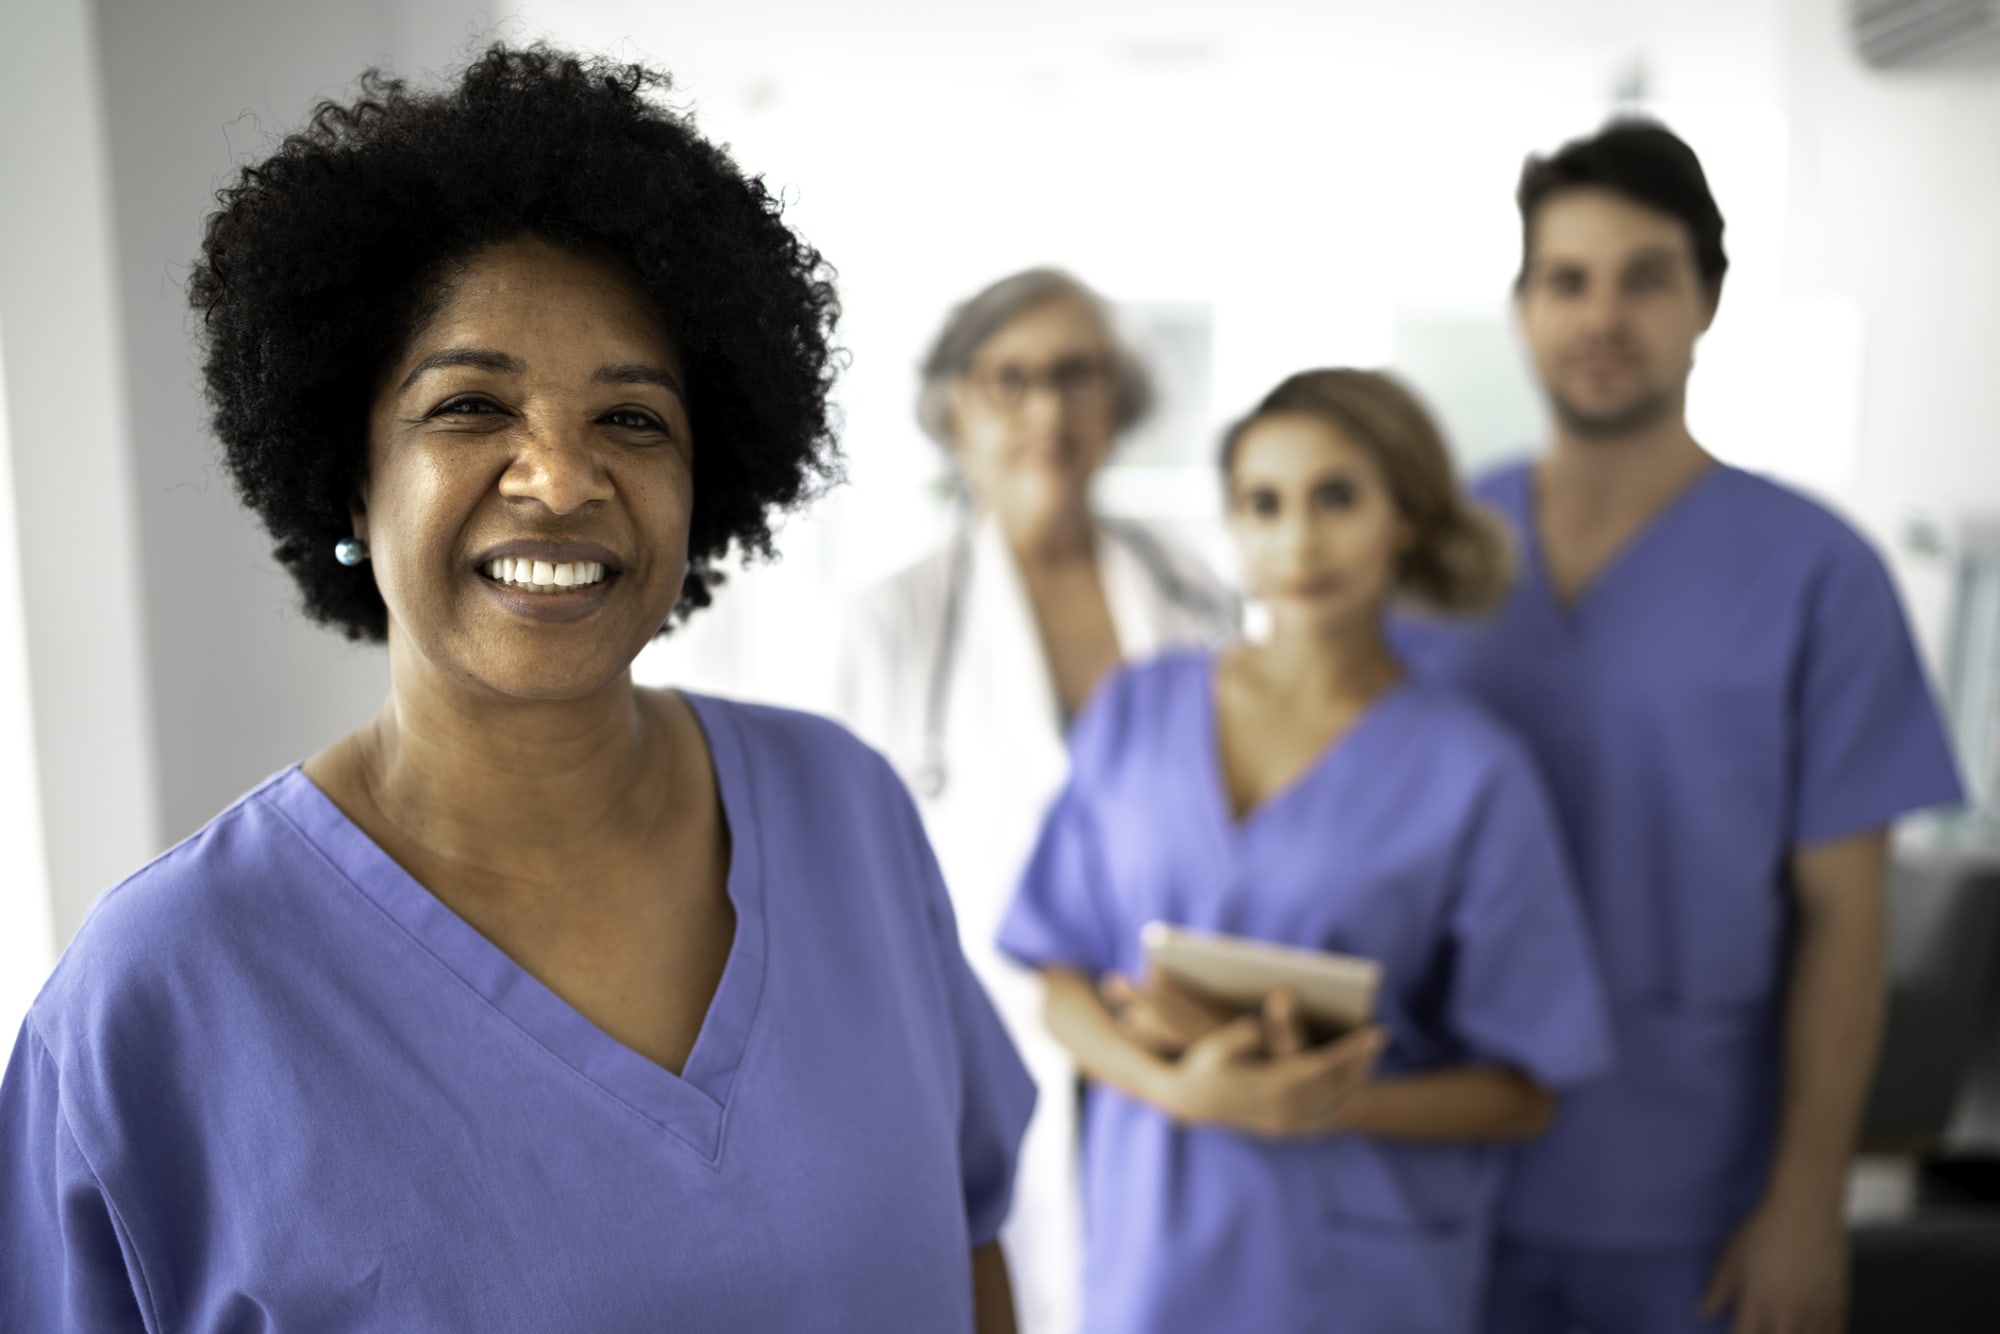 Nurse Leadership Roles: The Differences Among Nurse Executives, Administrators, and Managers